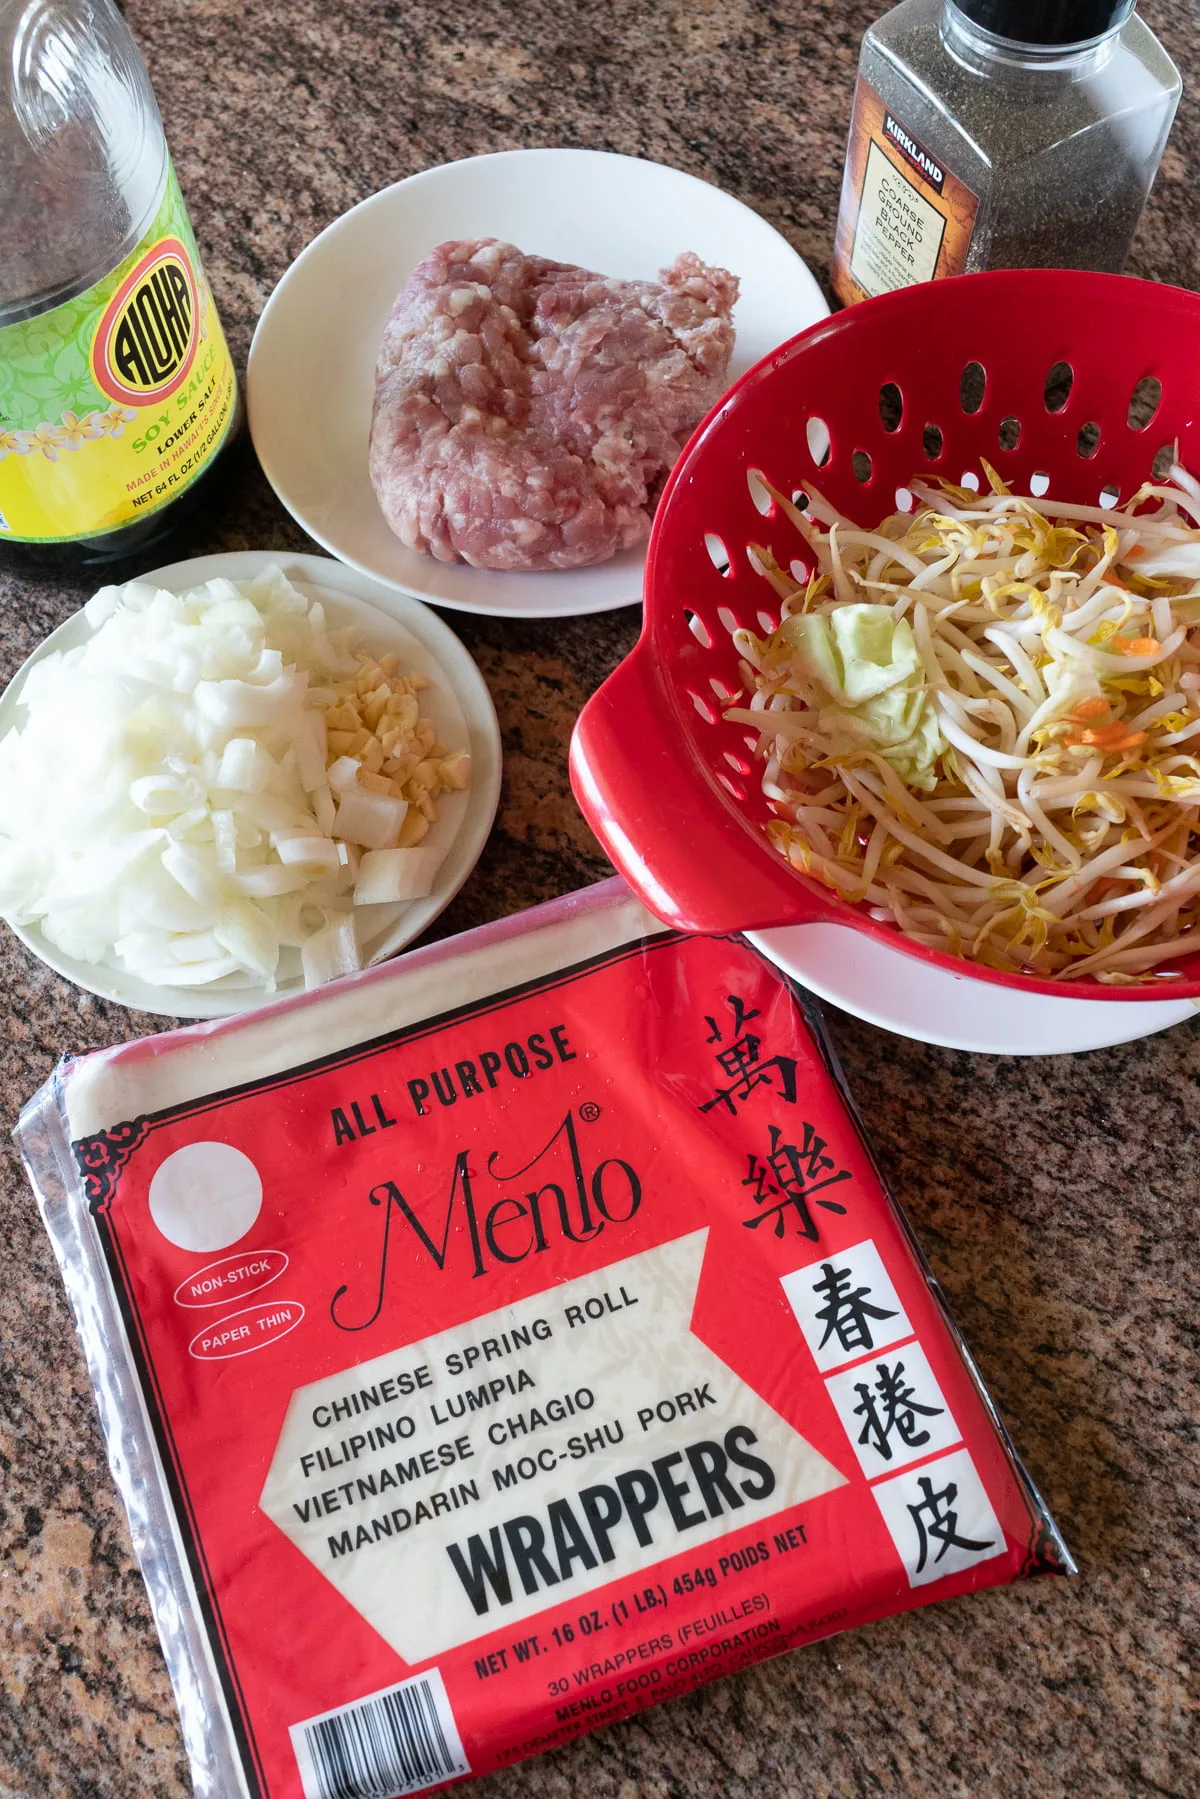 Ingredients for making lumpia on a table (lumpia wrapper, ground pork, onion, vegetable mix, soy sauce, and black pepper).